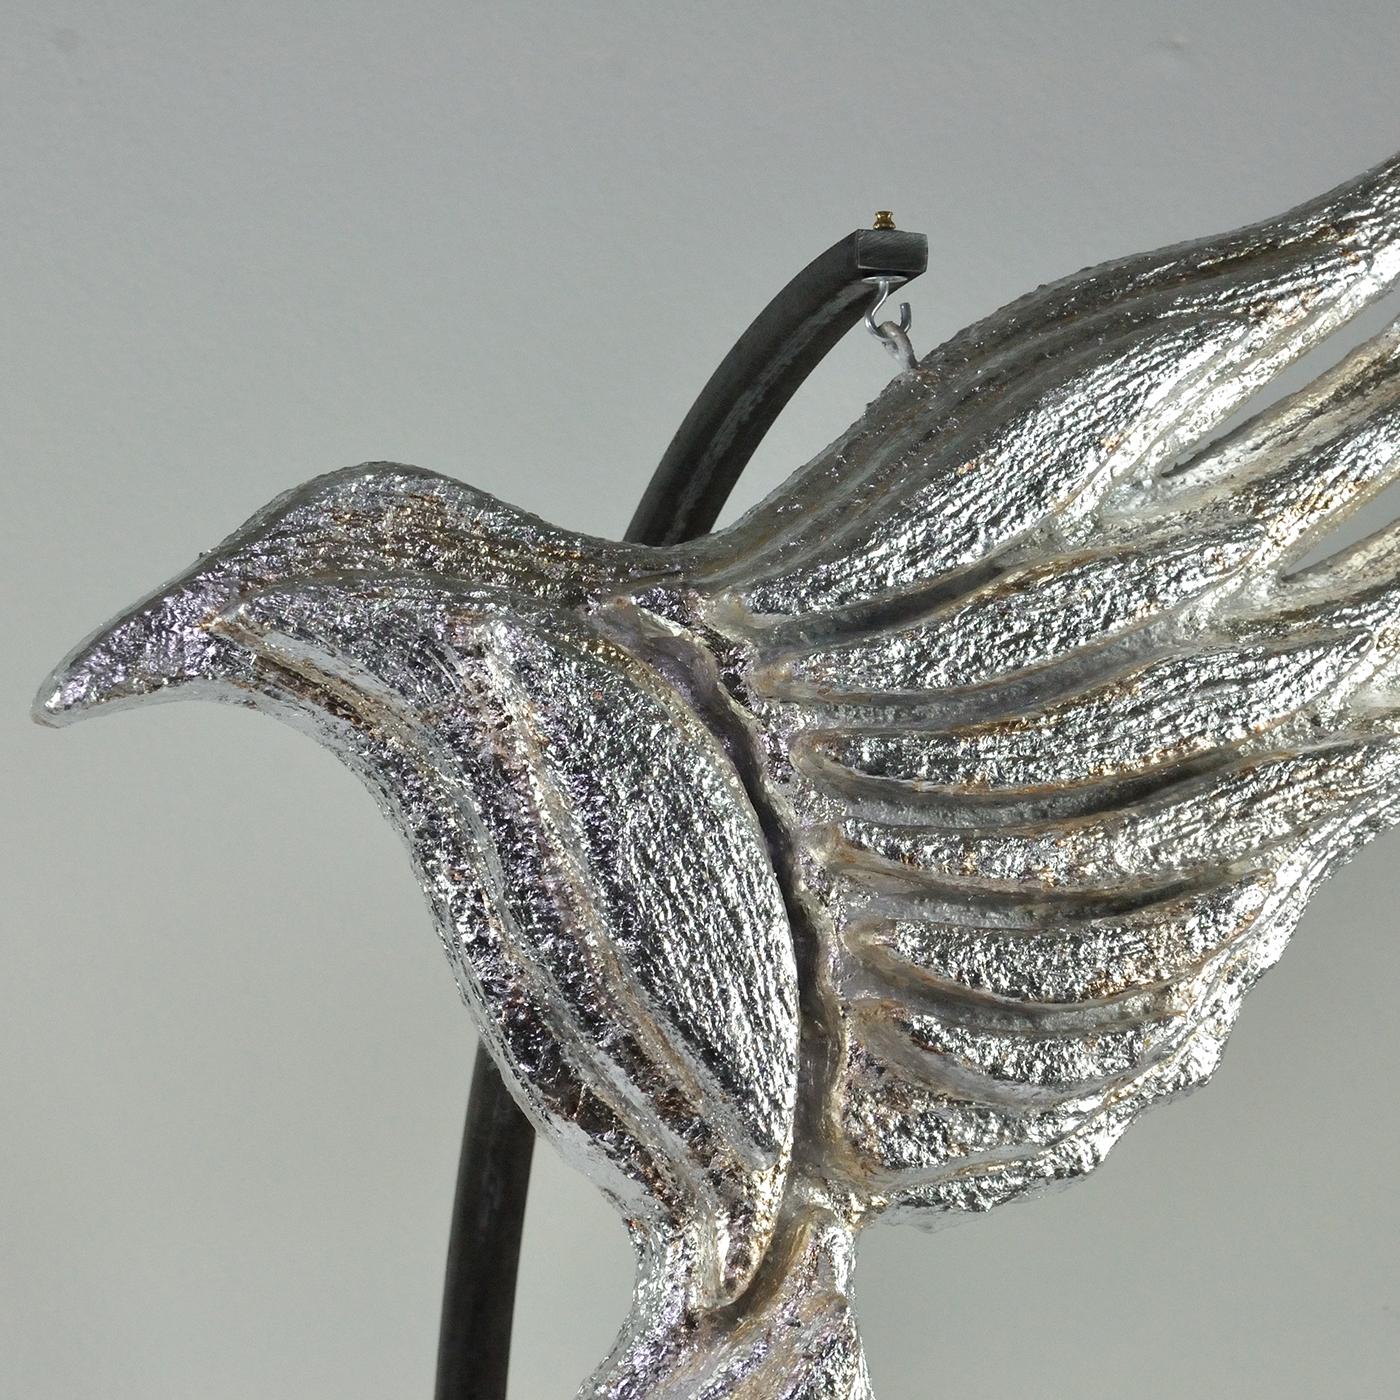 An ode to freedom, this sculpture flaunts a sinuous bird captured right before flapping its wings. Precious silver leaf covers its entire body, lending a stunning shimmering quality and enhancing the texture obtained with the application of plaster